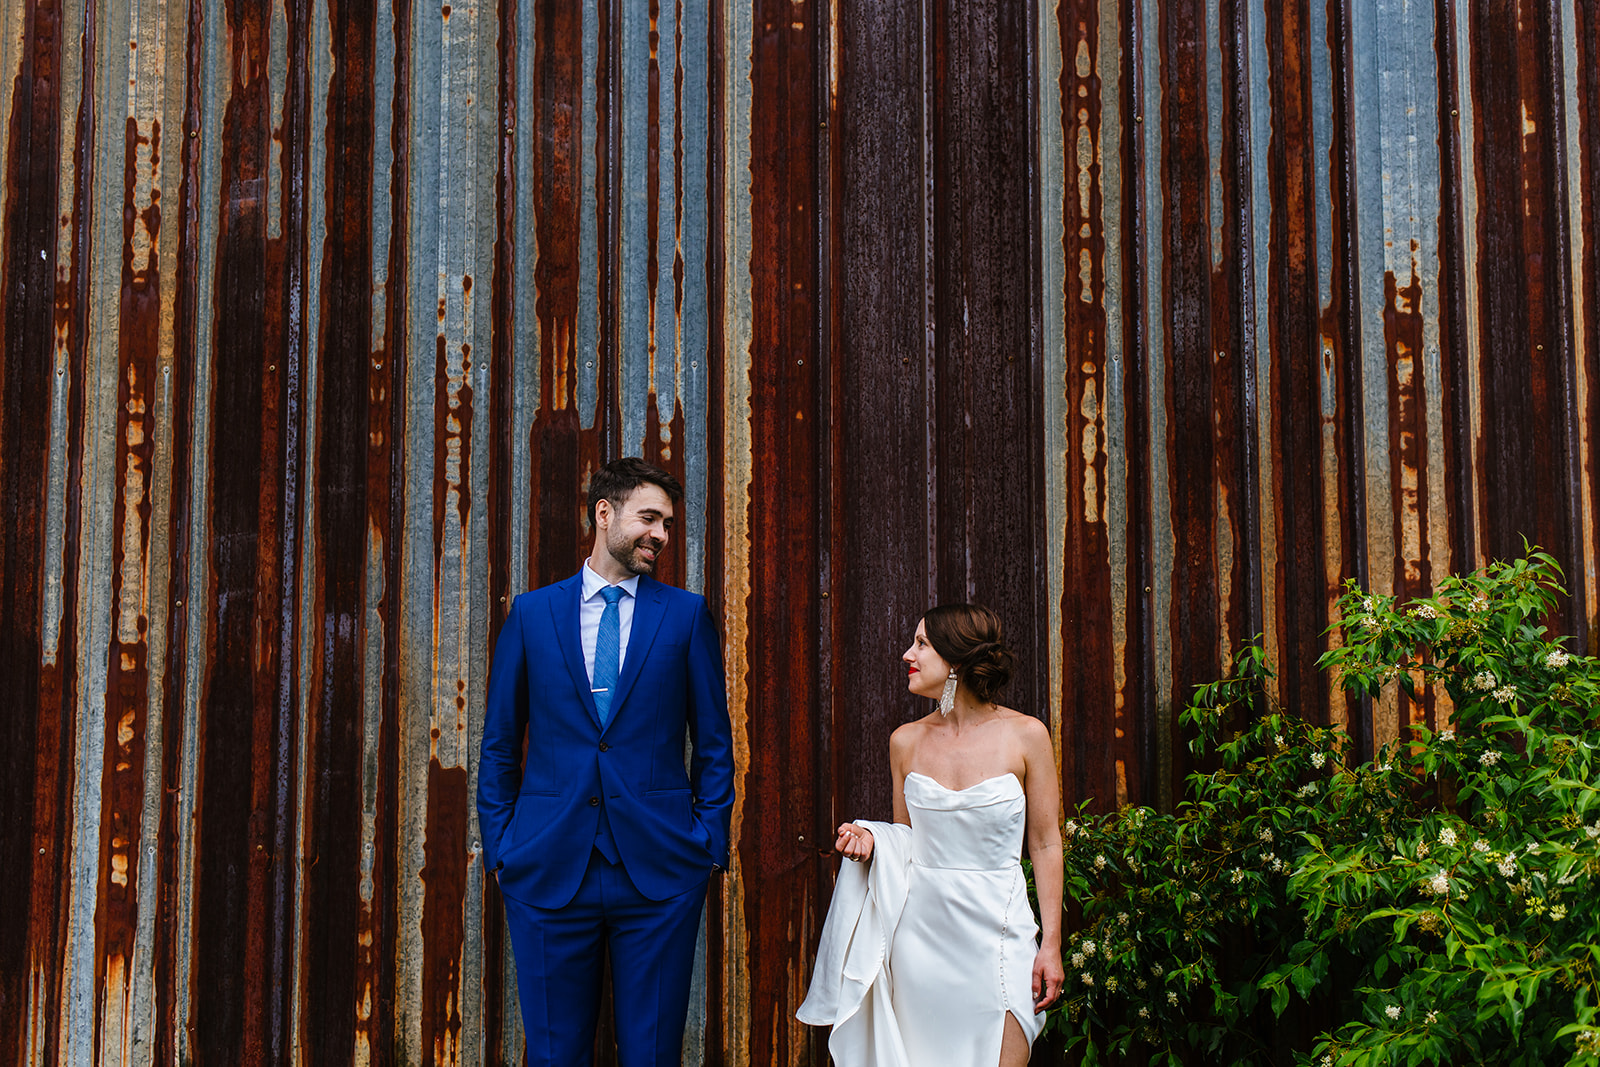 Bride and groom smile and look at each other outdoors against an old factory building.